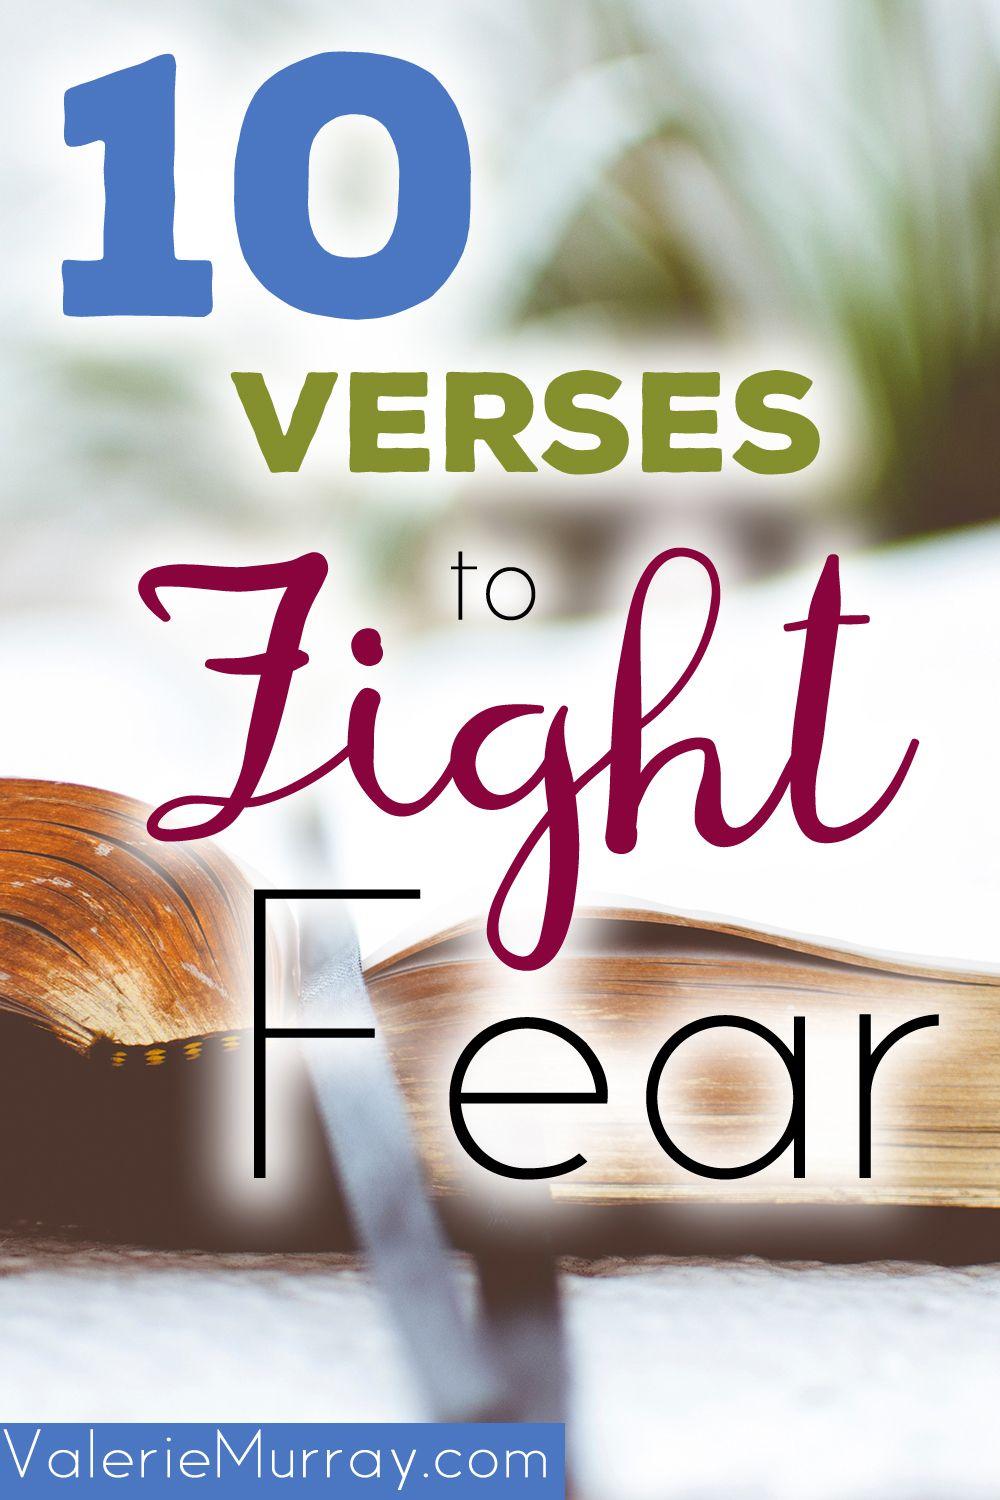 Printable Fear of God Logo - Verses to Fight Fear free printable. Truths, Thoughts and Verses